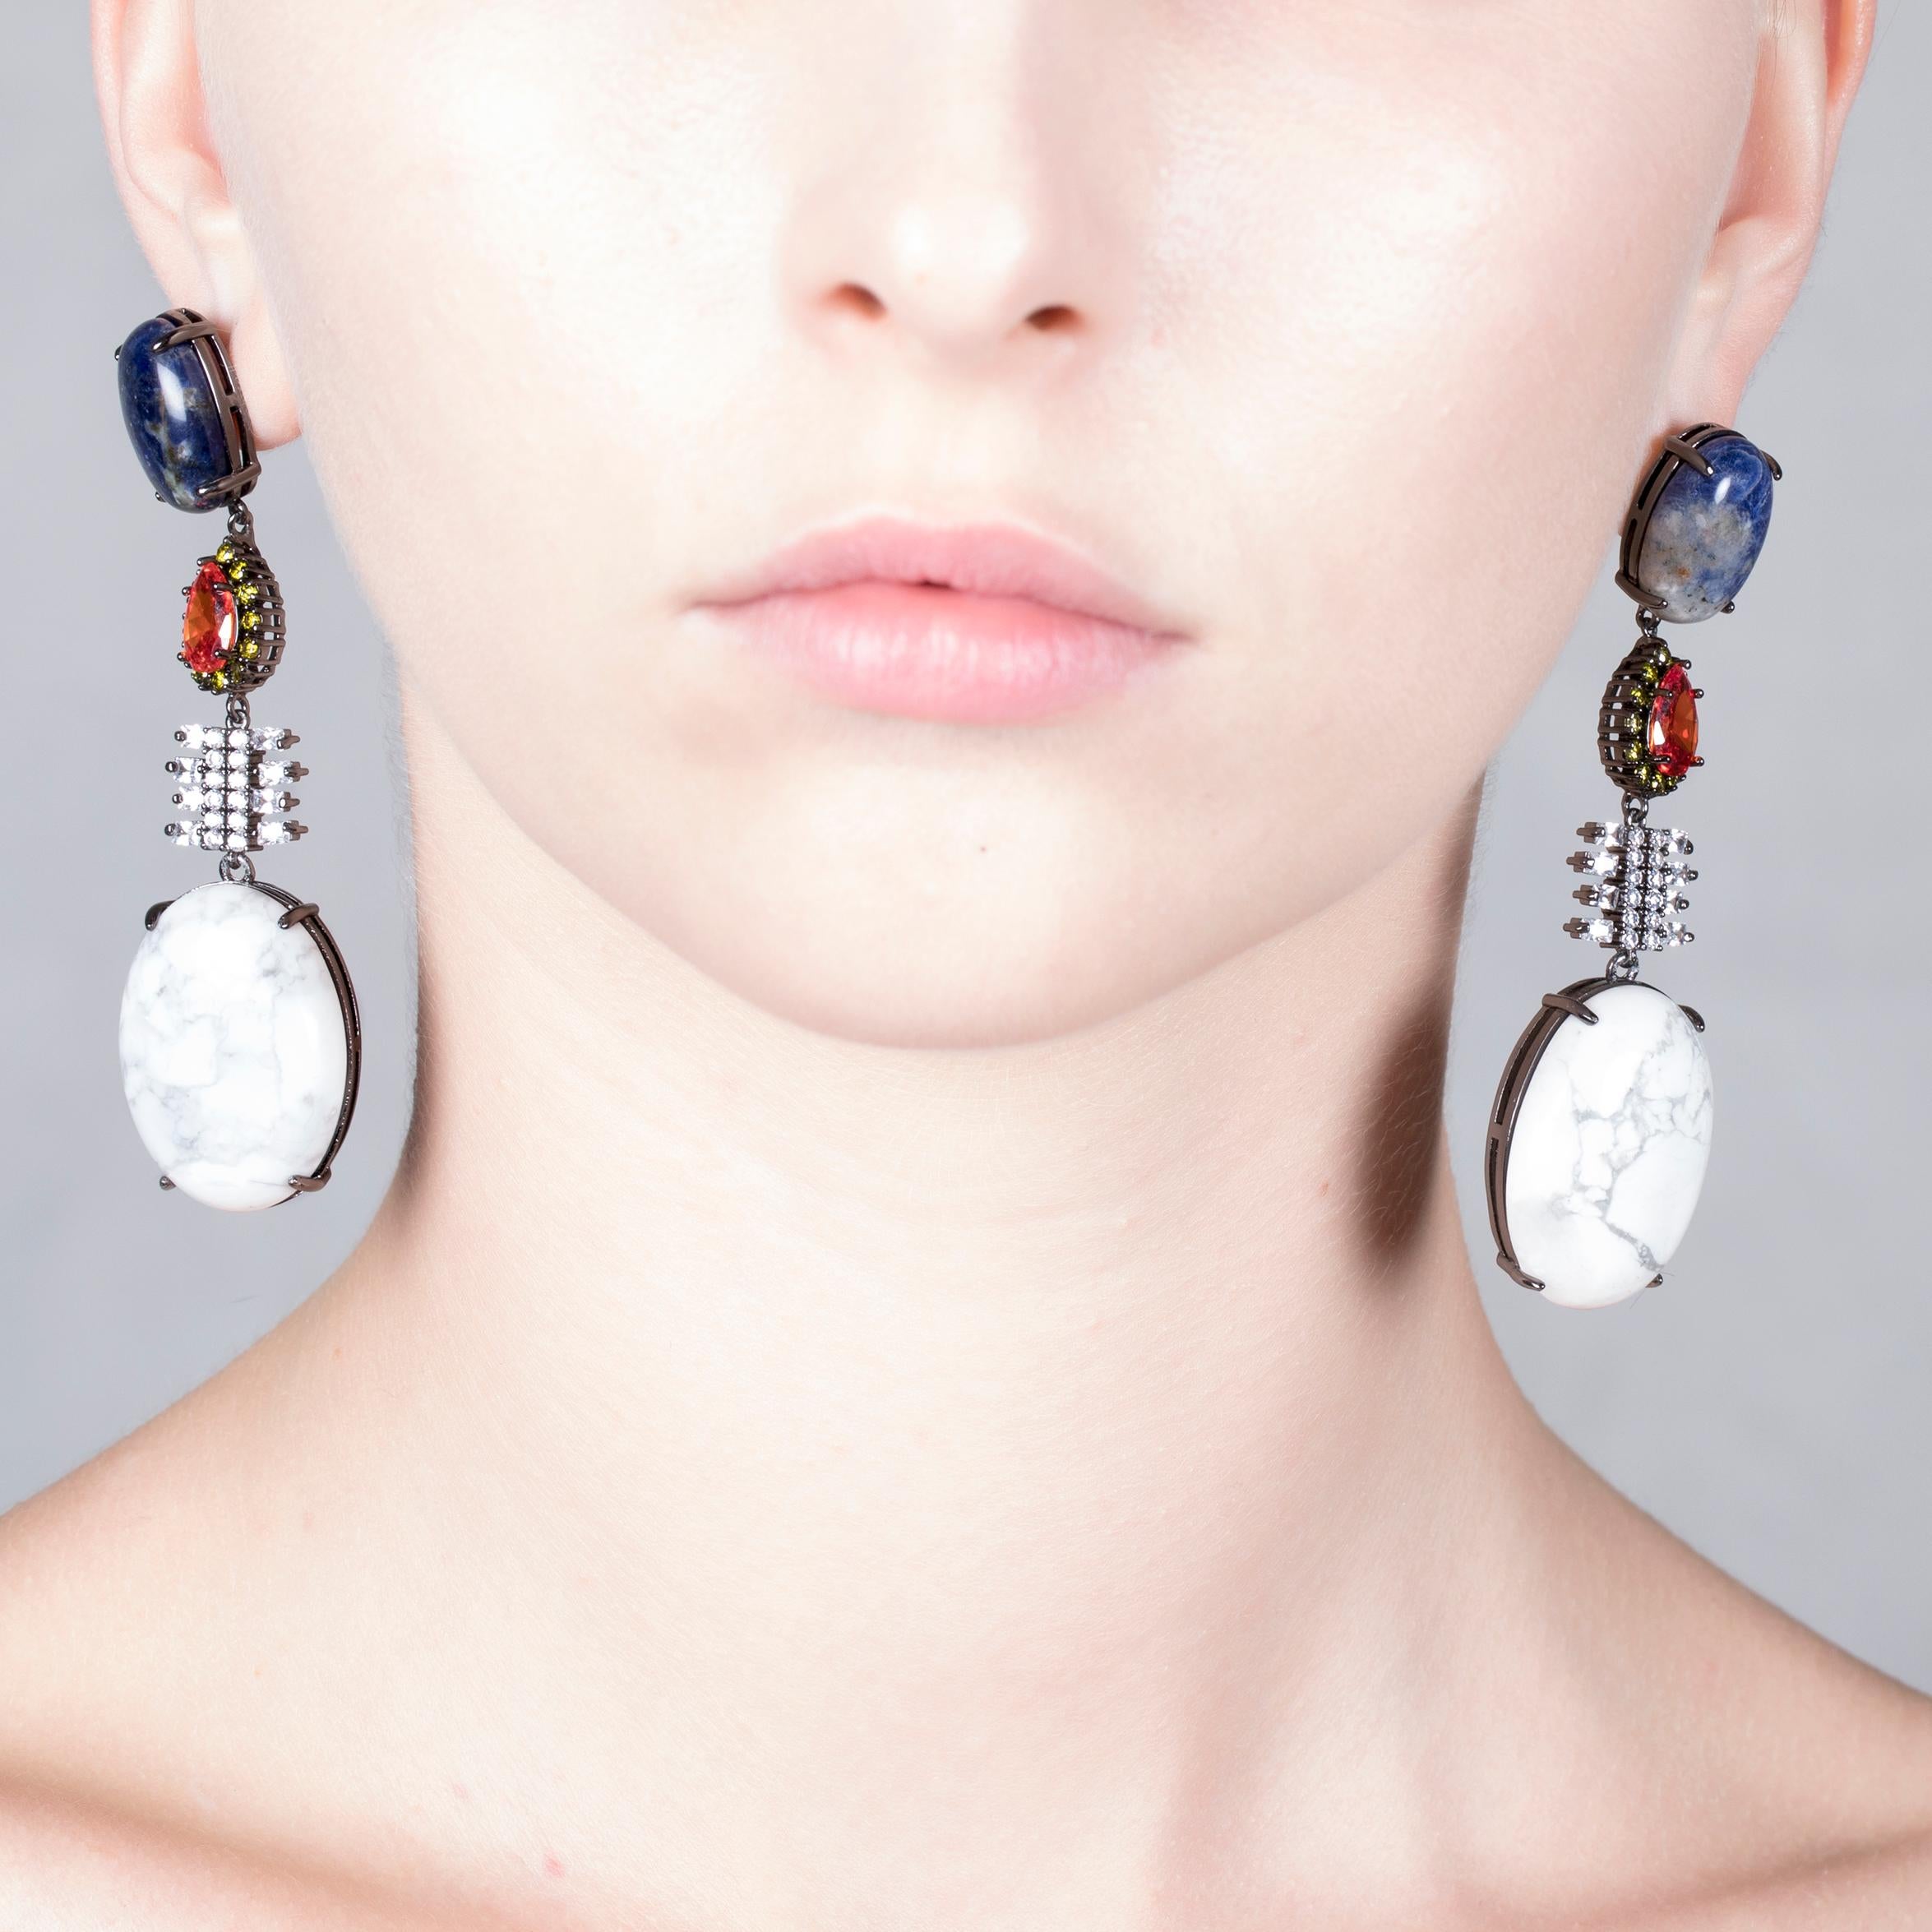 Inject a dose of color with these IOSSELLIANI CLUB AFRICANA sodalite dangling earrings. Following the vocation of the brand, this pair of earrings translate colors and shapes into eclectic jewels, featuring a superbe turquoise oval, a sodalite